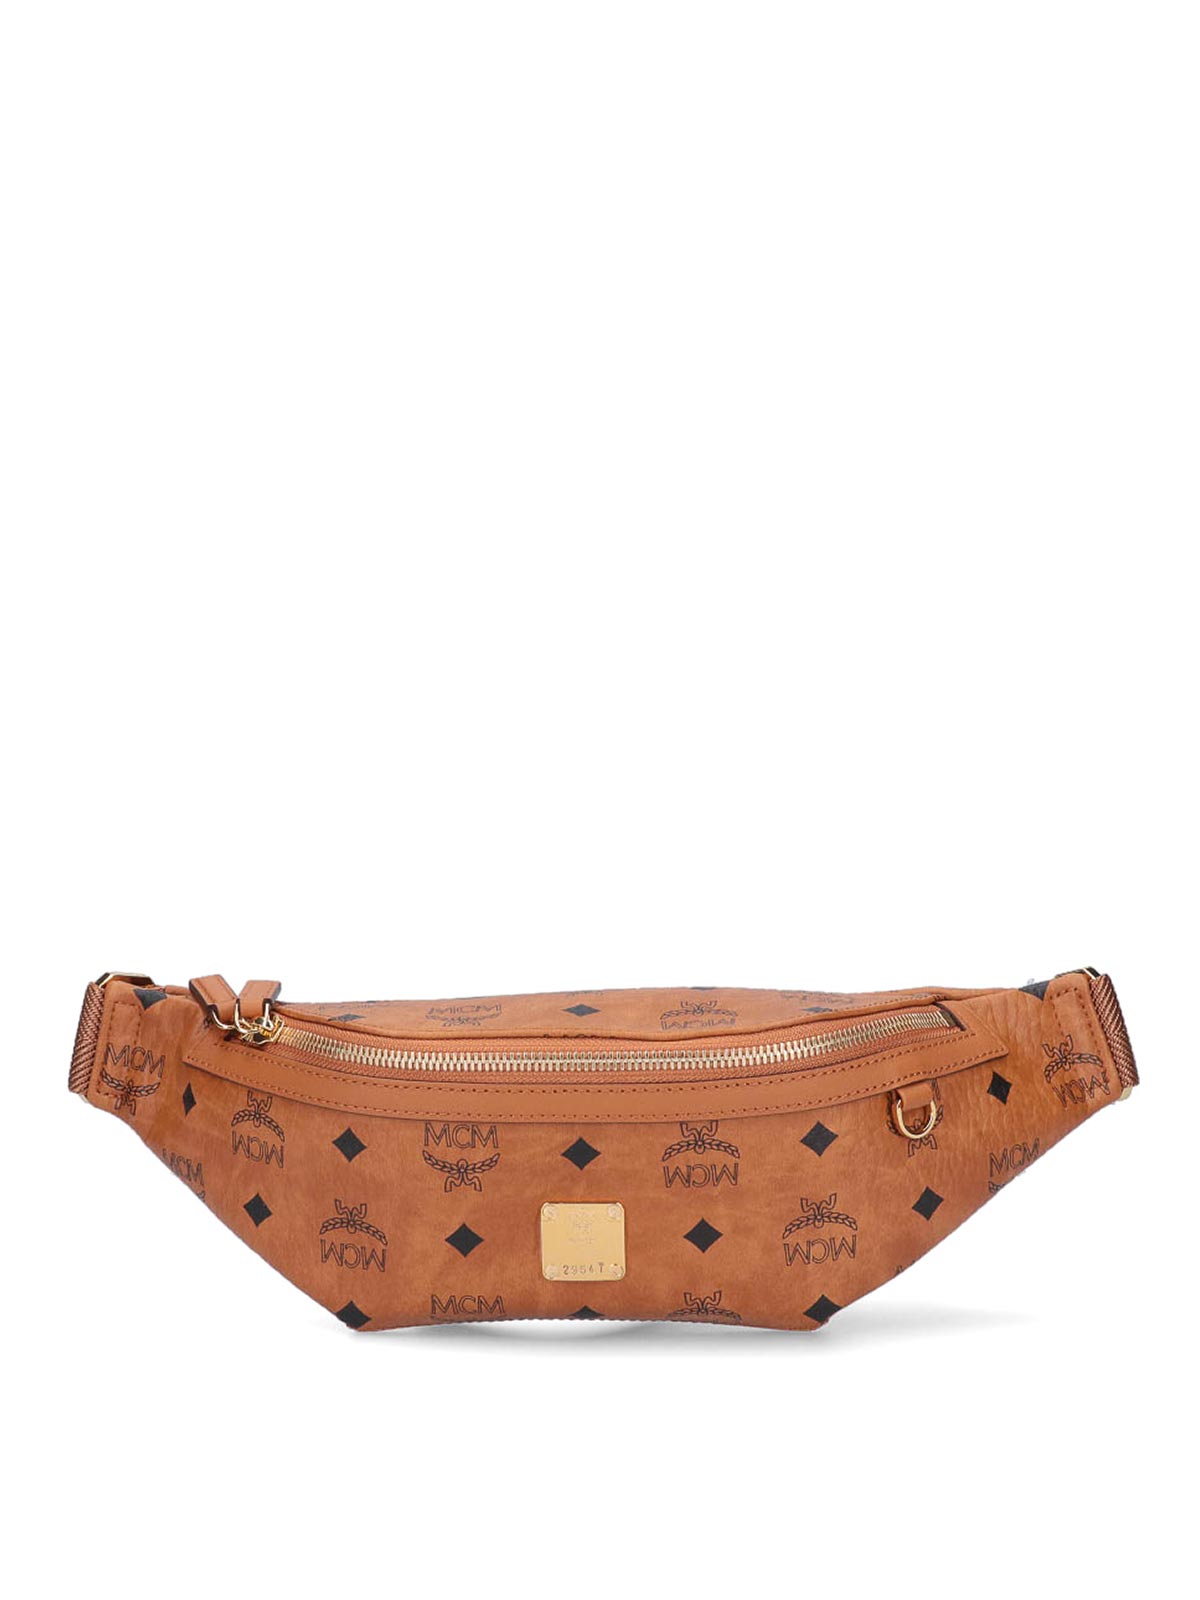 Mcm Small Pouch In Brown